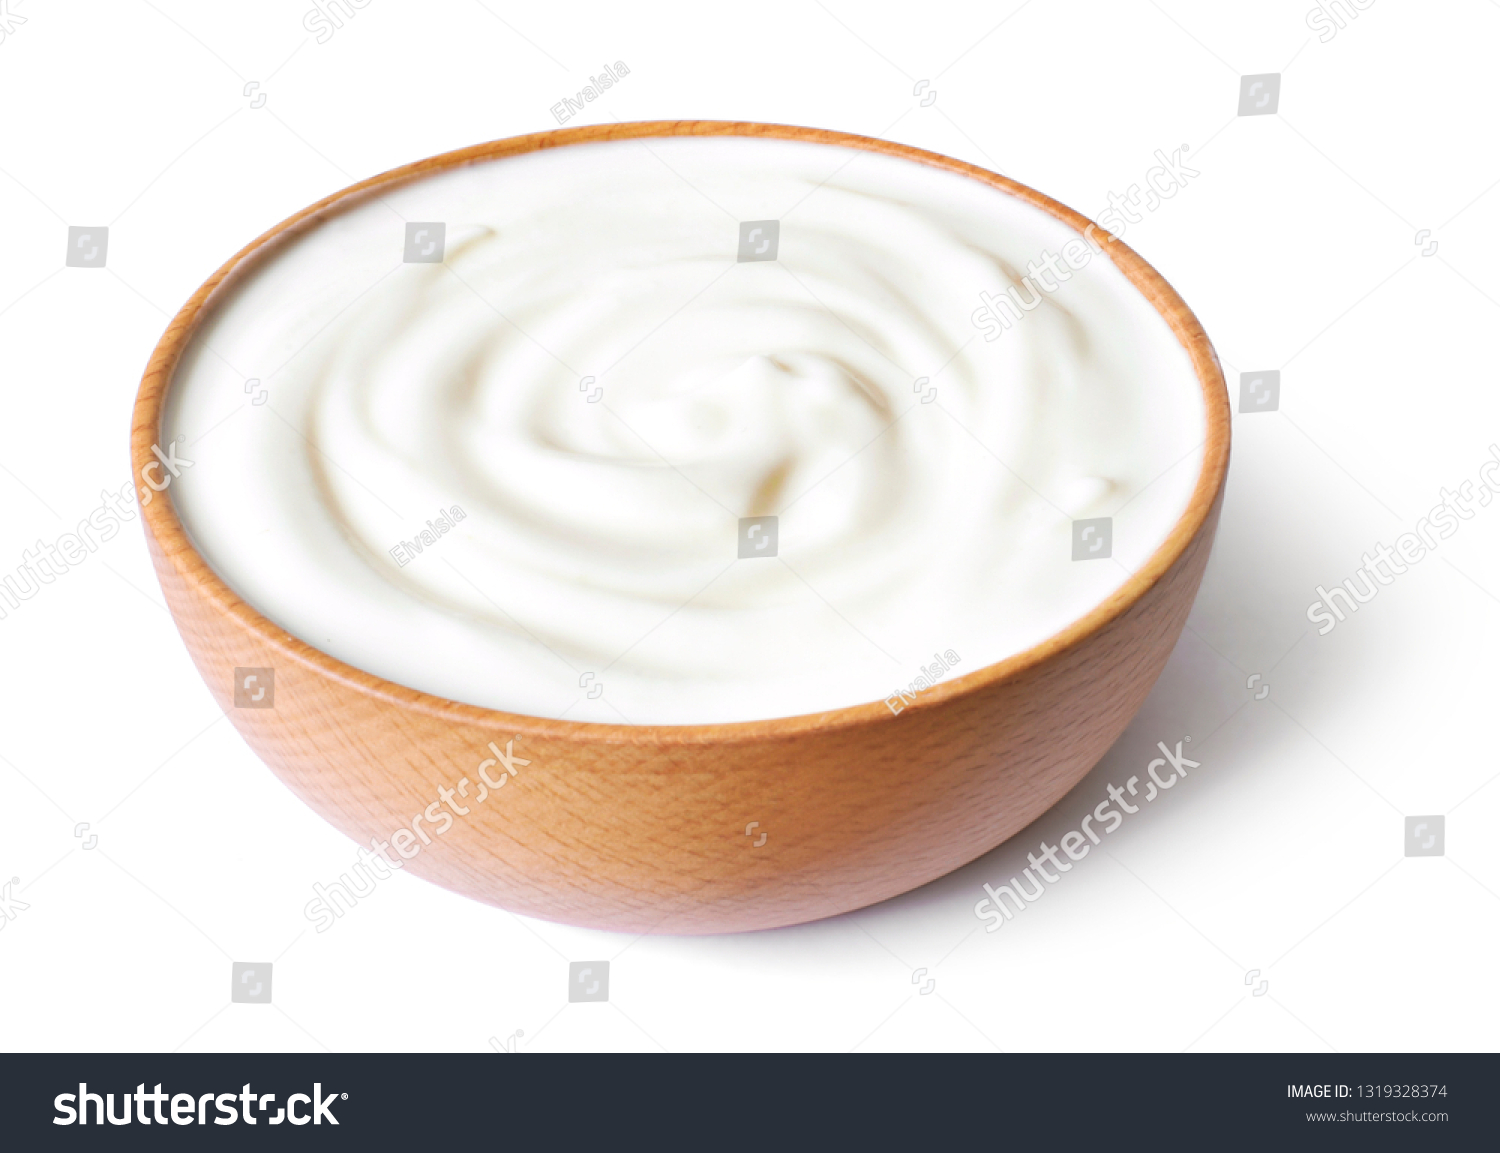 Delicious yogurt scene with wooden bowl, isolated on white background. Closeup shot of healthy fresh yogurt or cream. Top view. #1319328374